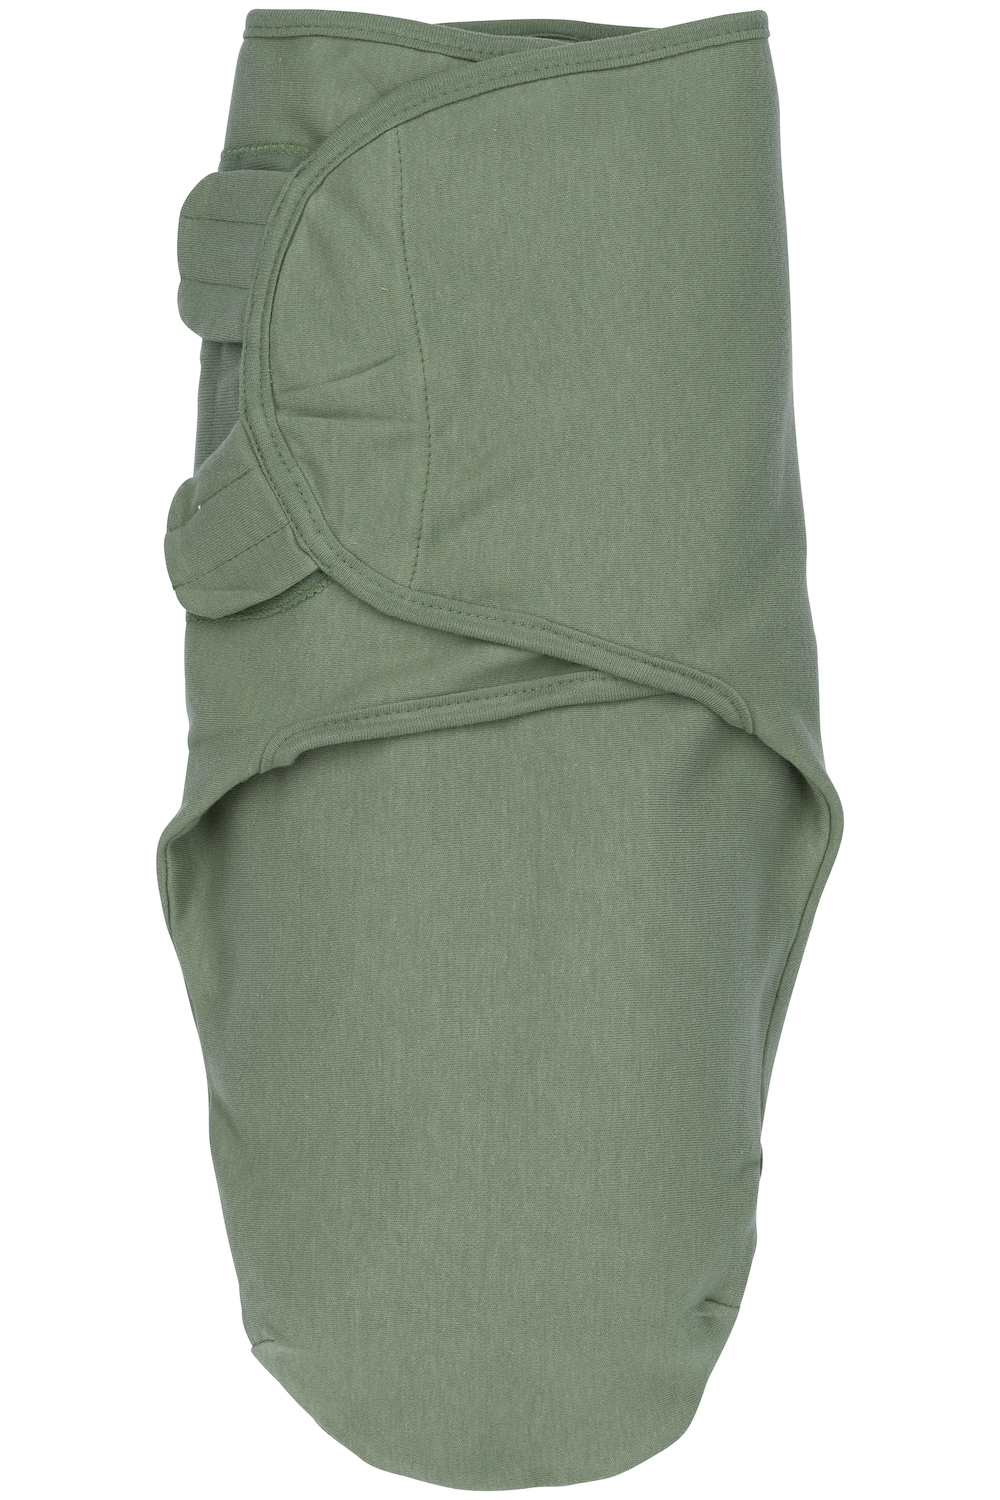 Swaddle Uni - forest green - 0-3 Months